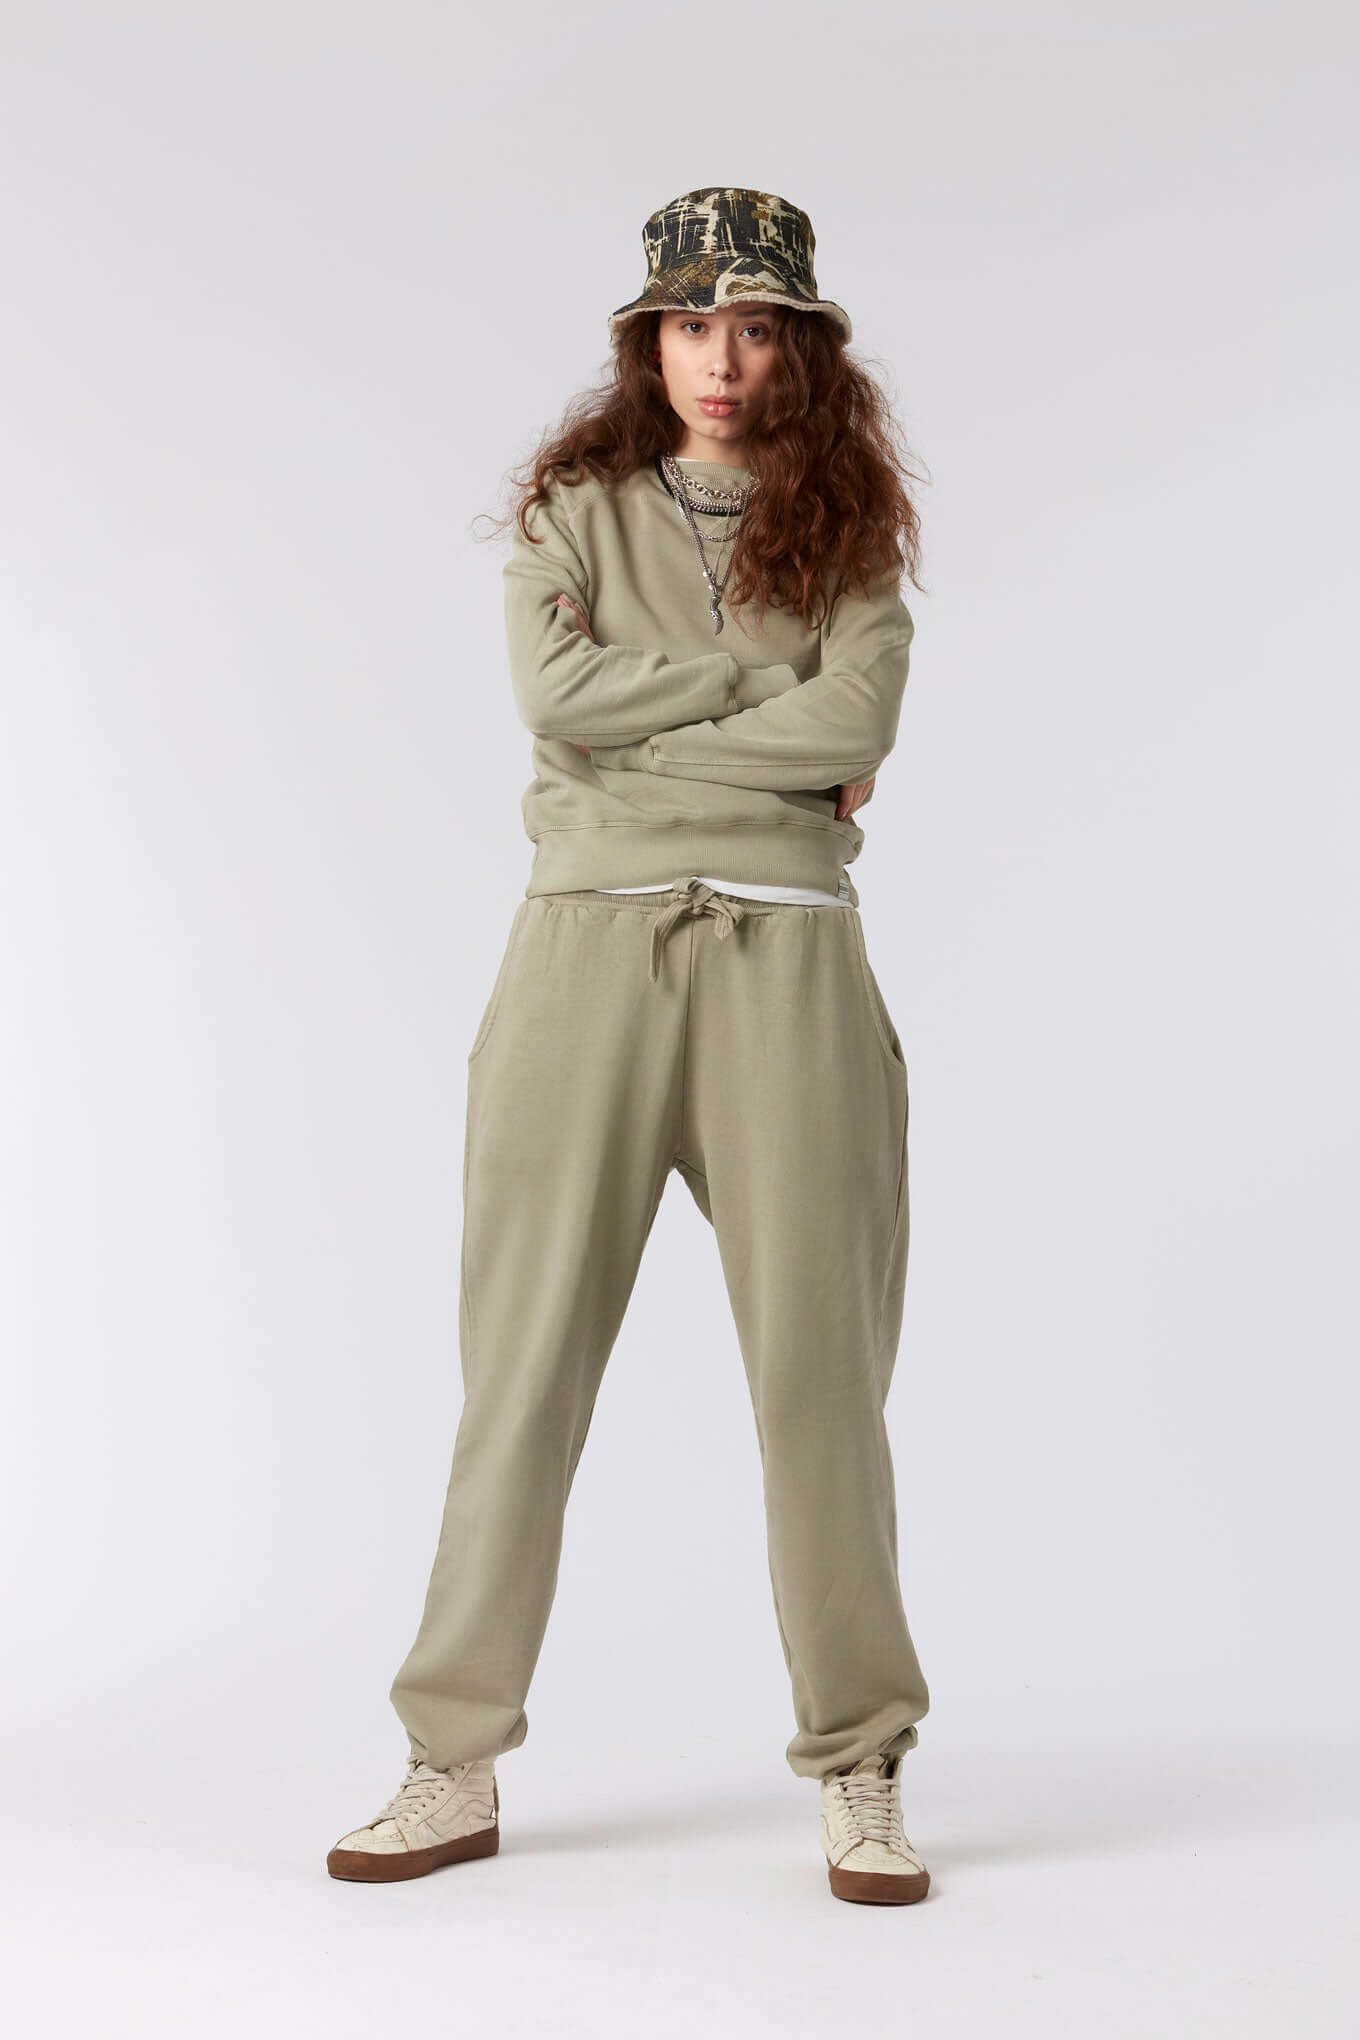 EVIE - GOTS Organic Cotton Trackpants Clay, Size 1 / UK 8 / EUR 36